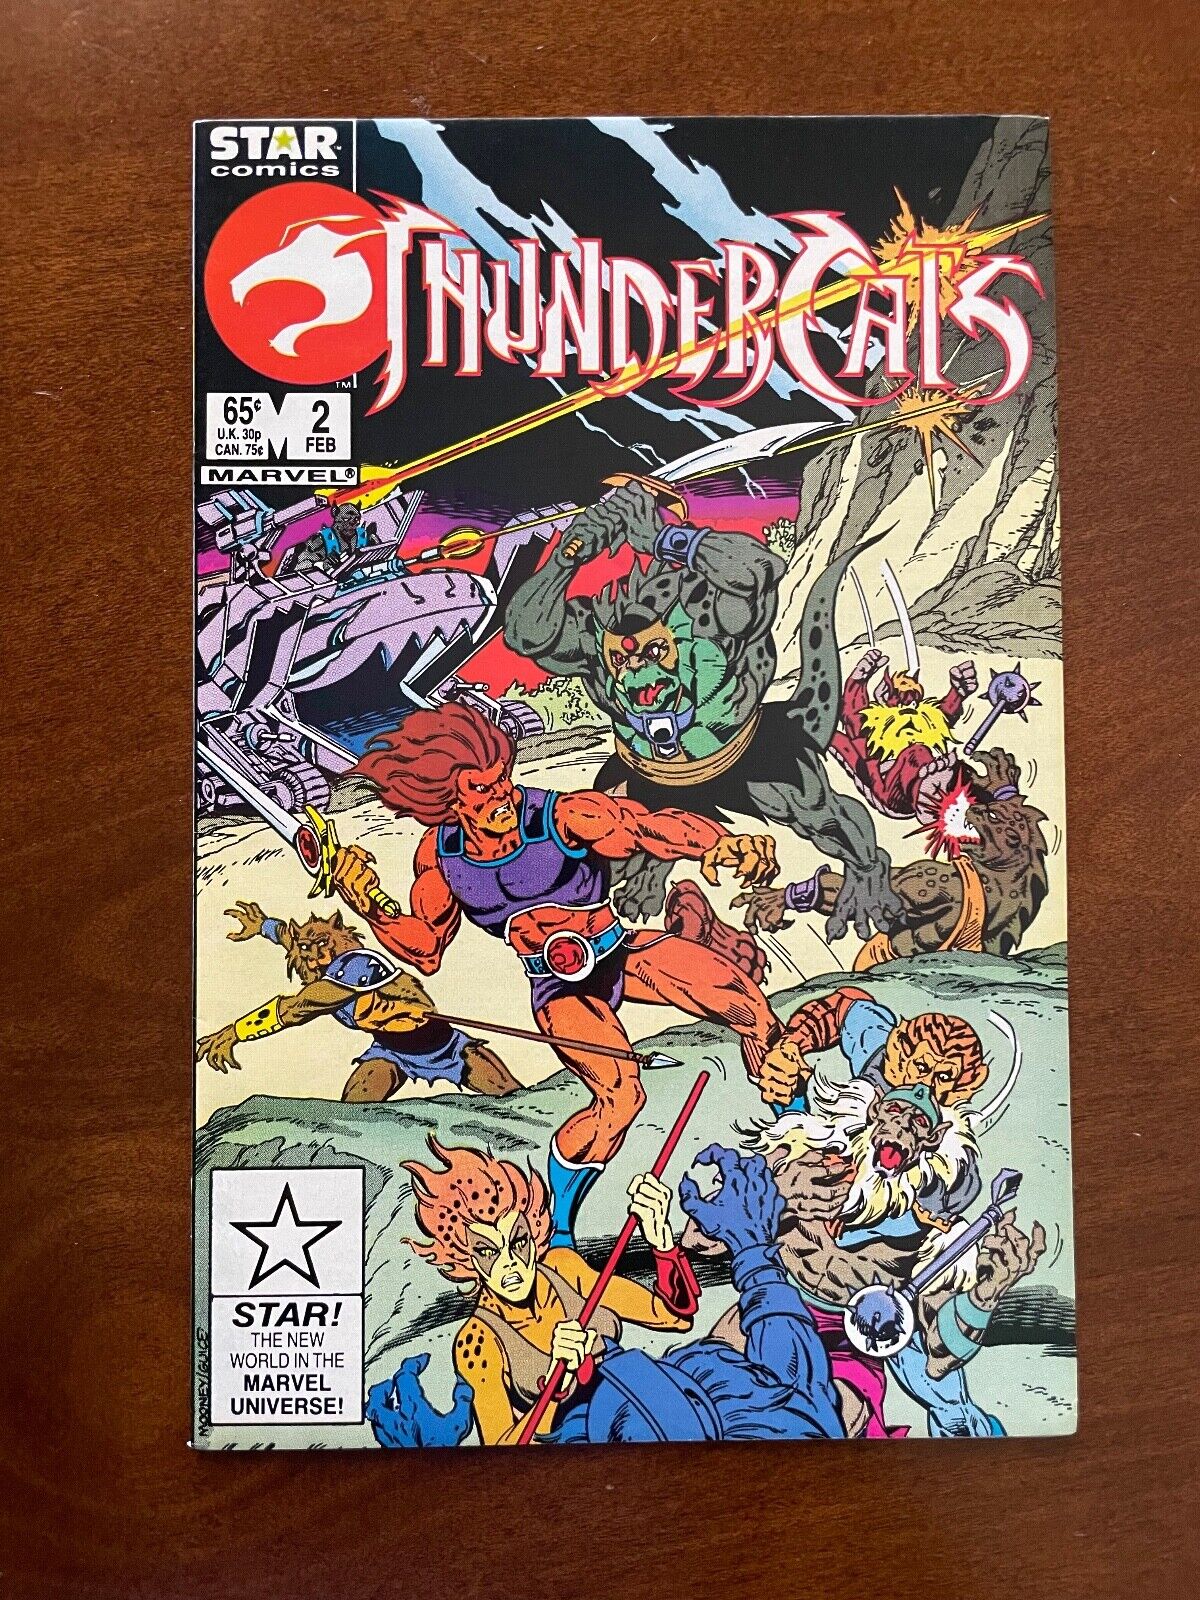 Thundercats, You Pick, Marvel (1985), VF+ (8.5)-VF/NM (9.0), Combined Shipping